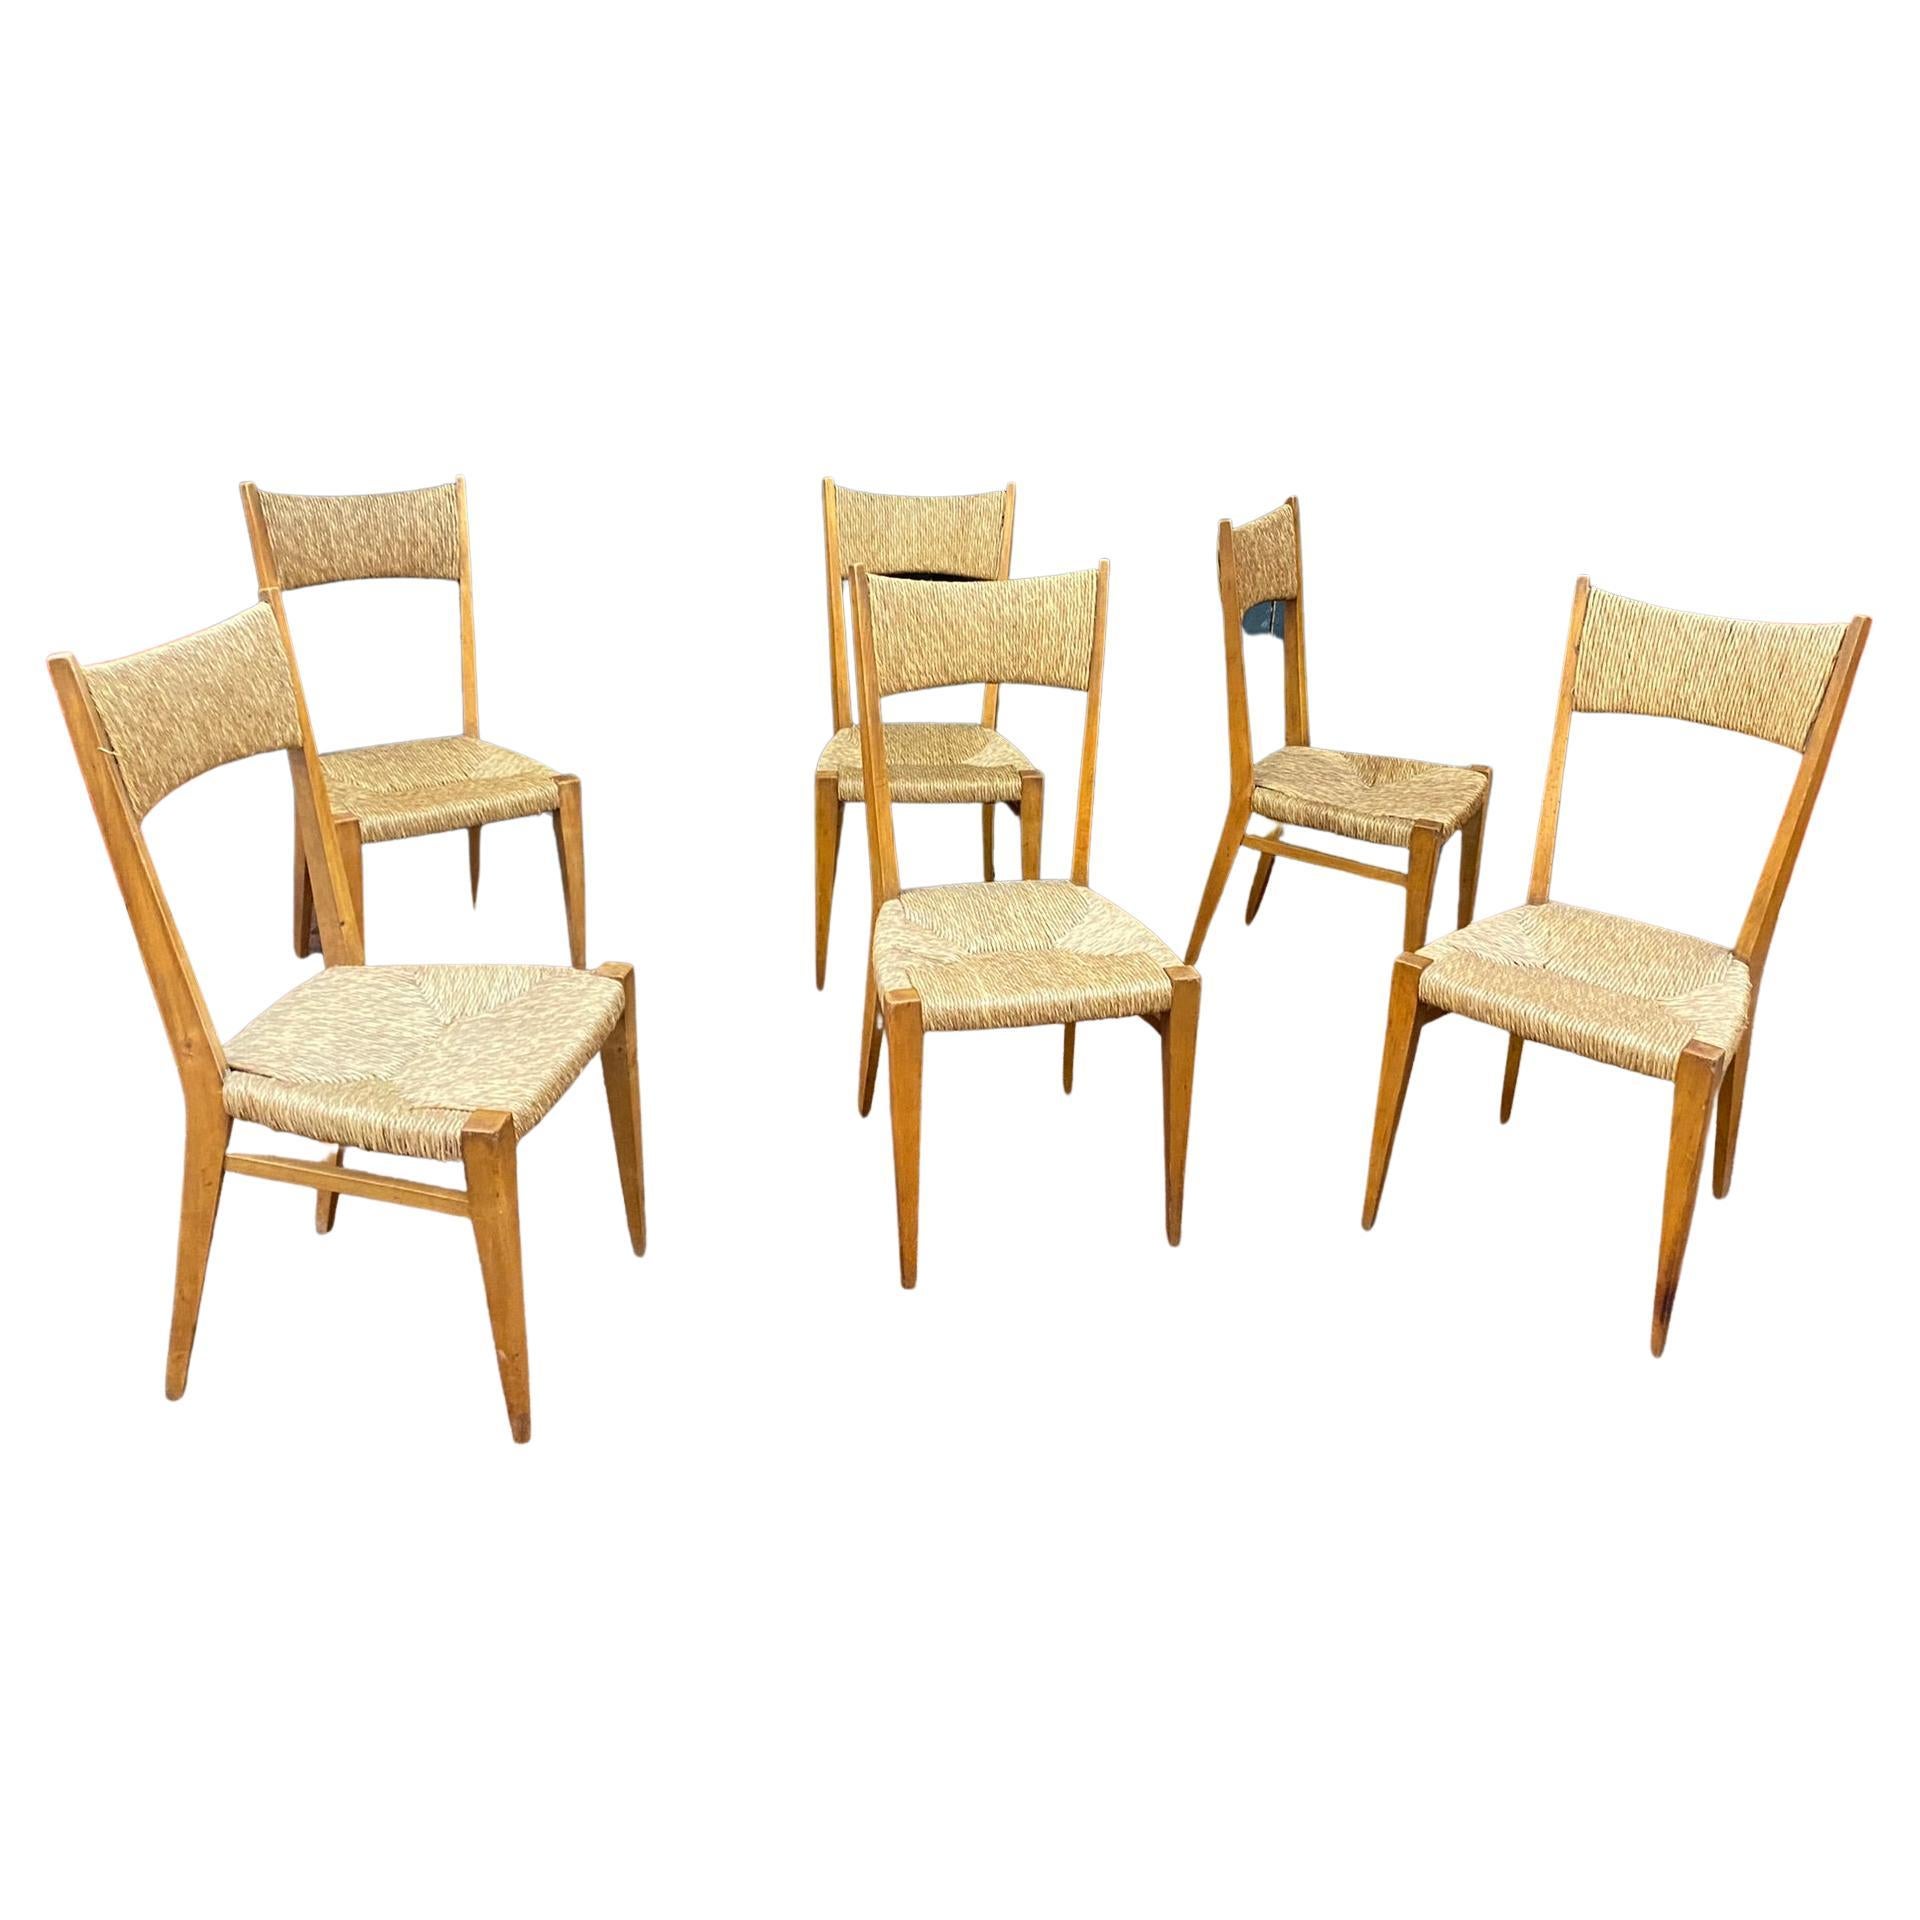 Series of 6 Elegant Oak Chairs, French Reconstruction Period, circa 1950 For Sale